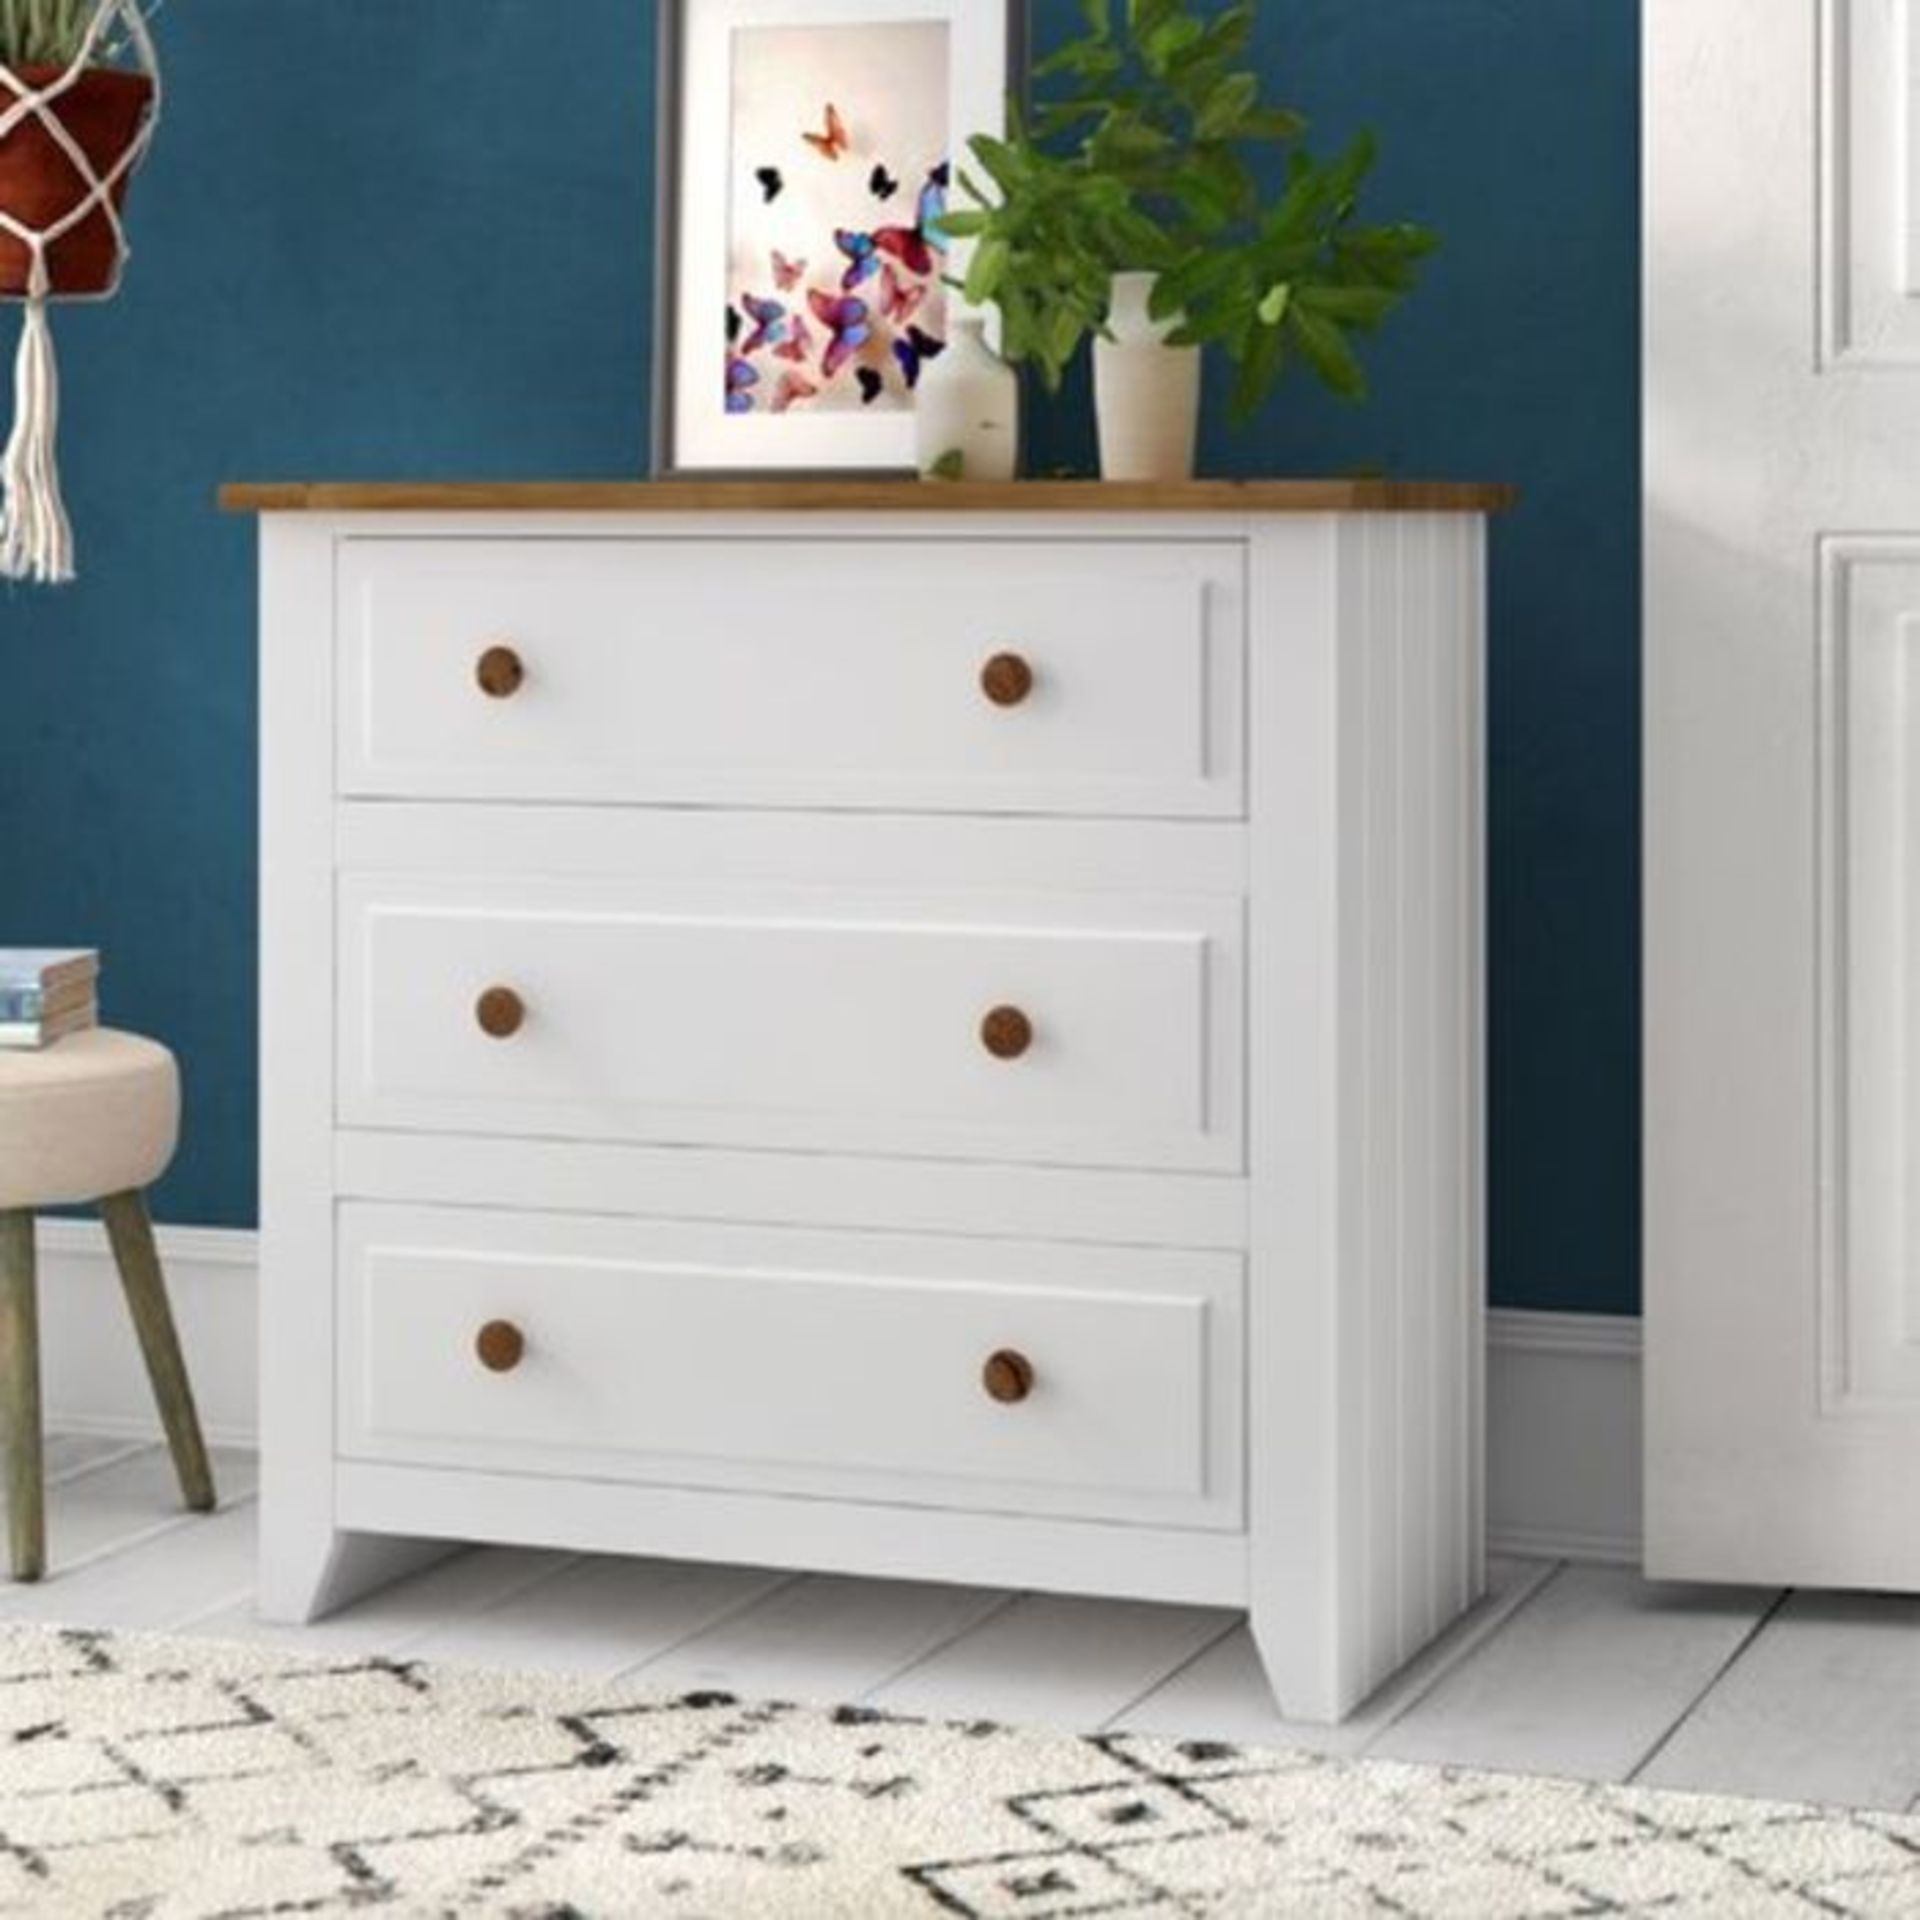 August Grove,Katalina 3 Drawer Chest RRP -£169.99